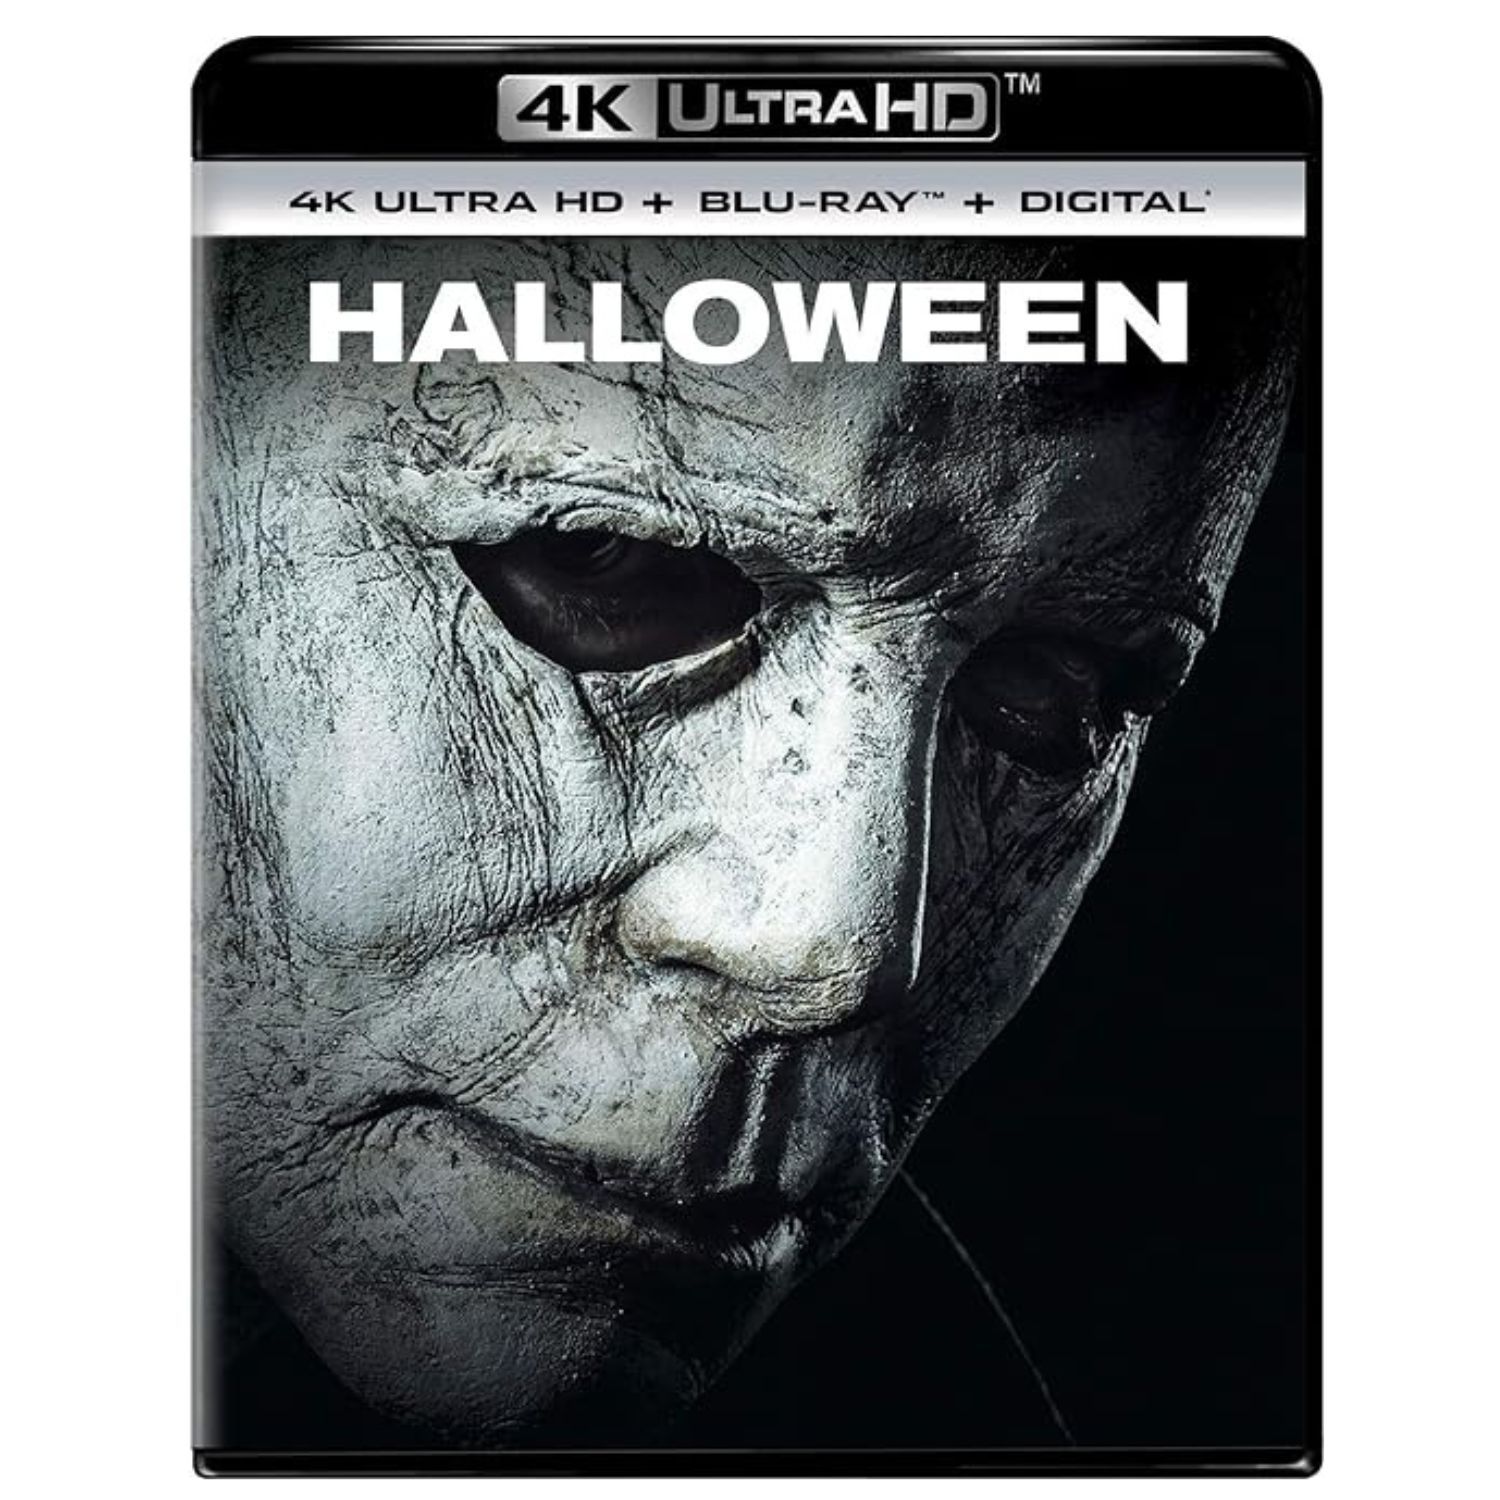 The cover of the 4K version of 2018's Halloween movie